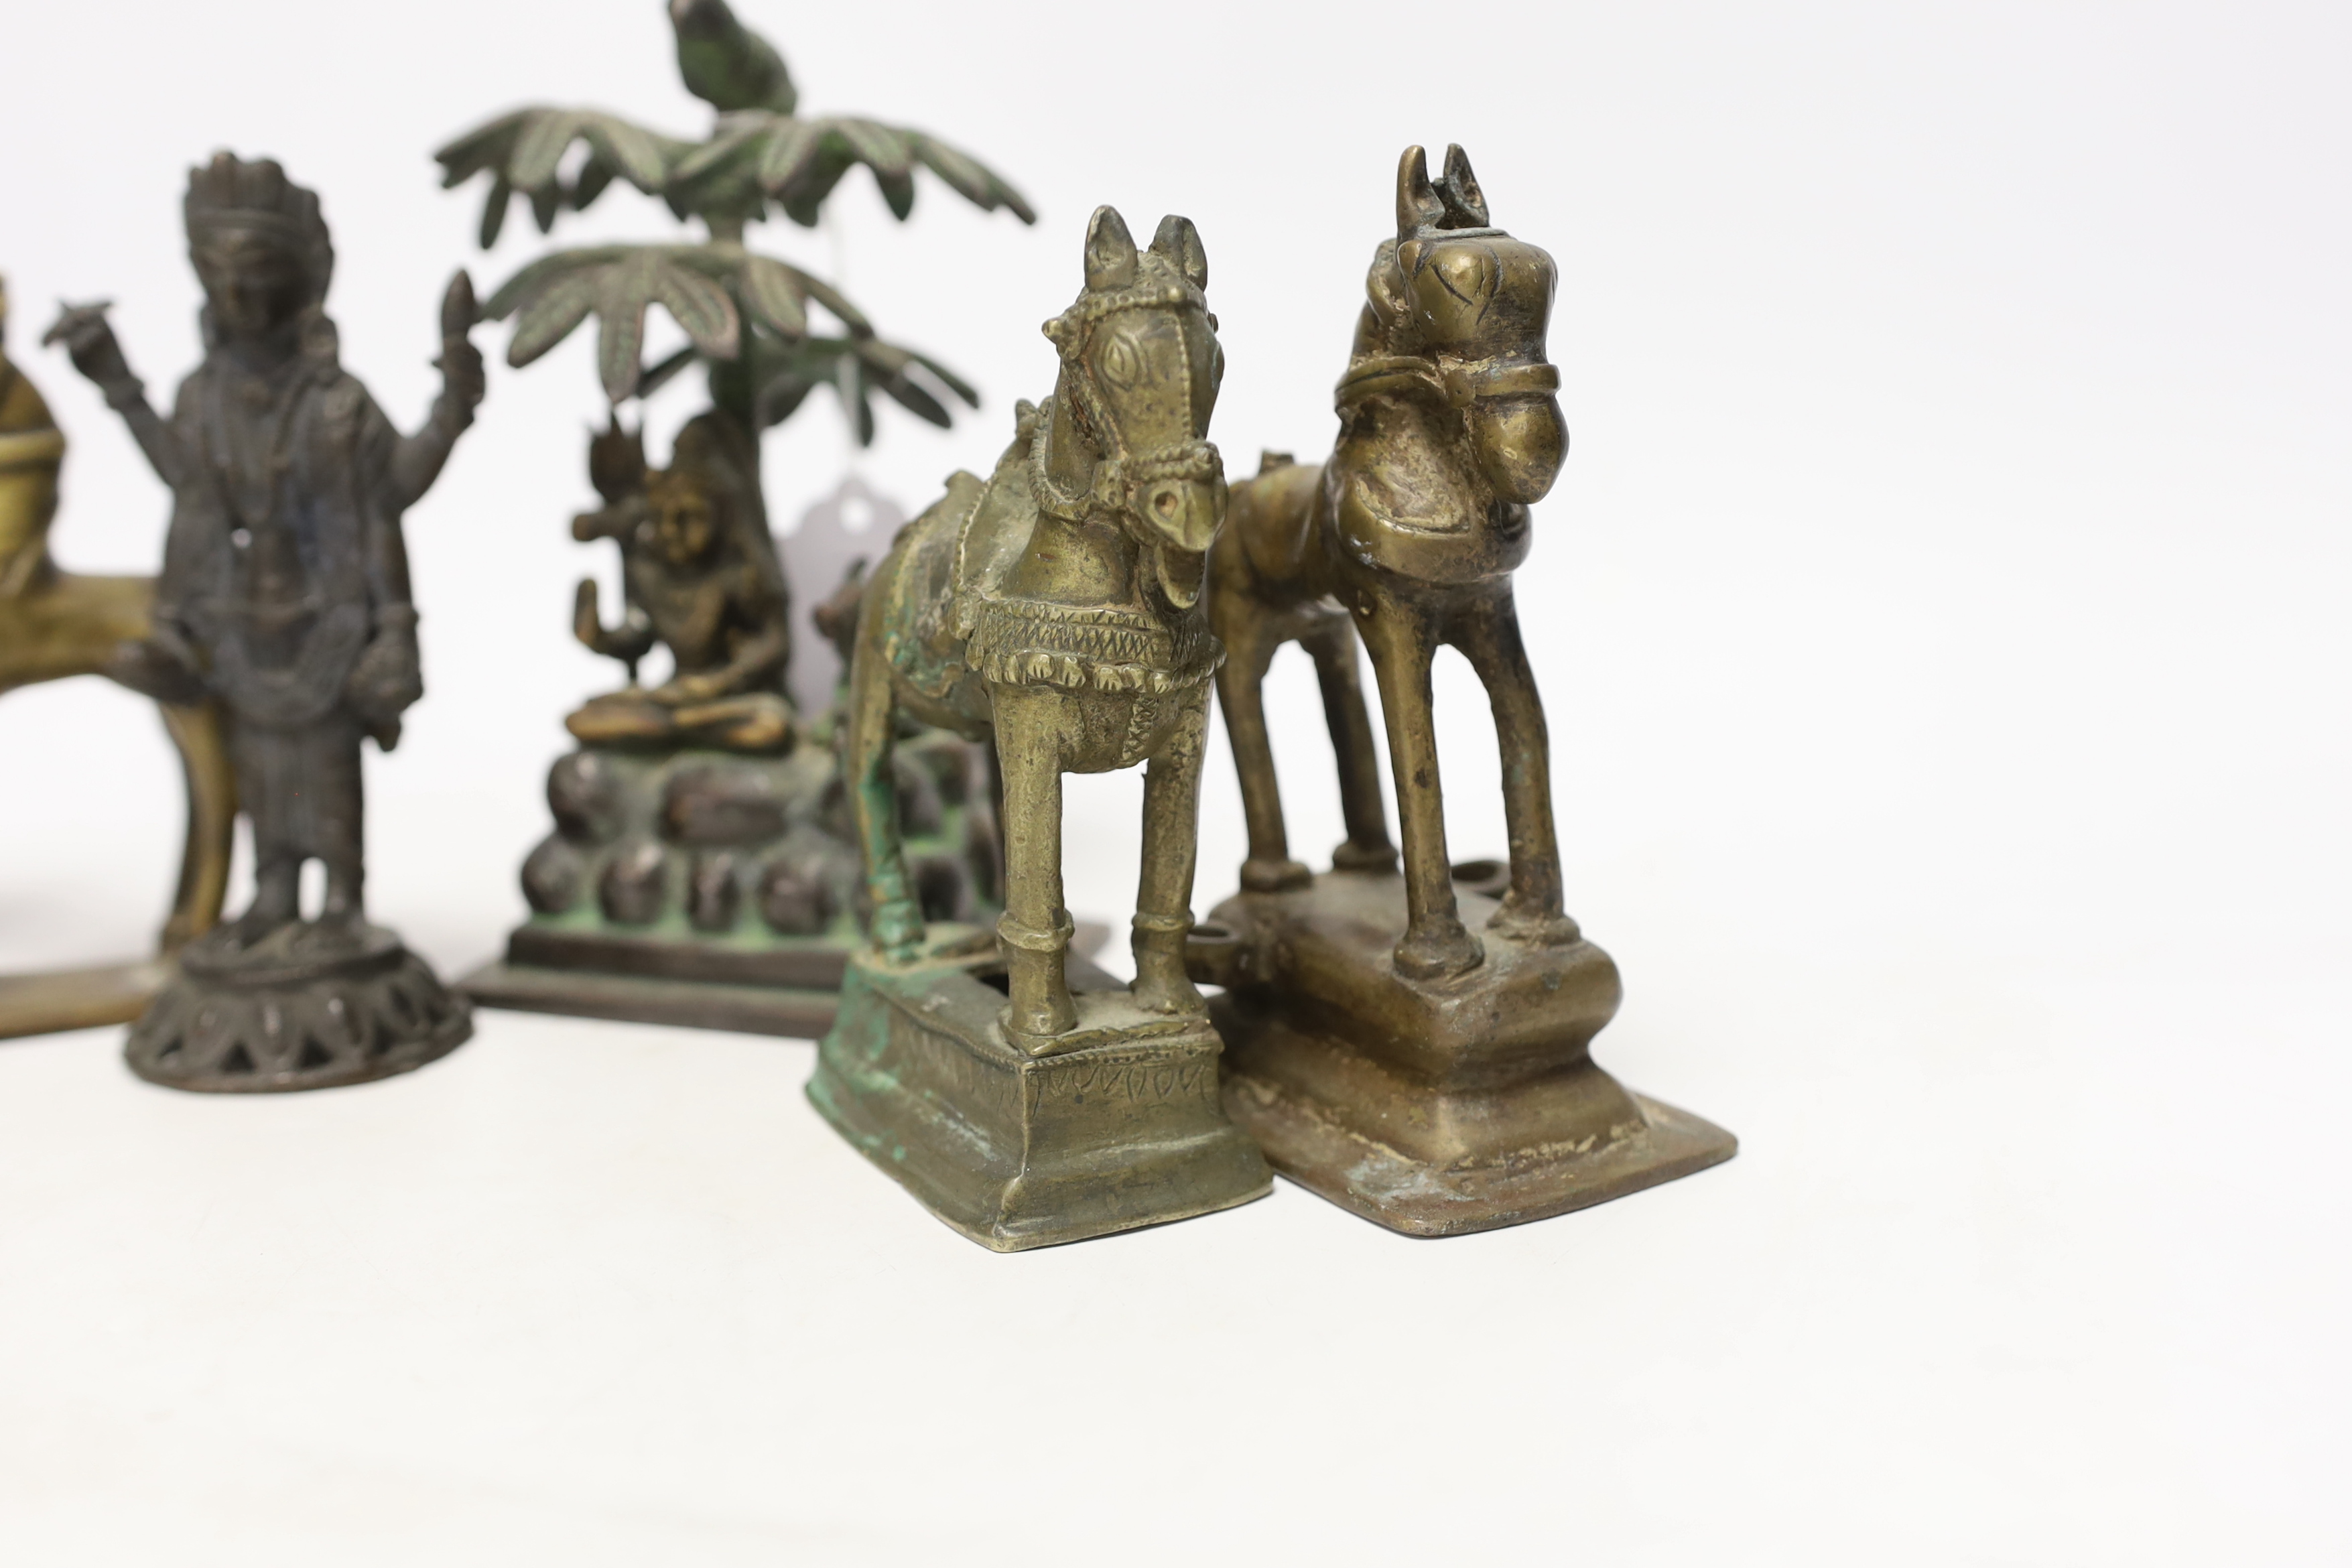 Six Indian bronze/brass ornaments; Shiva sitting under a bael tree with a bird, 17cm, two figures of Lord Vishnu and three horses